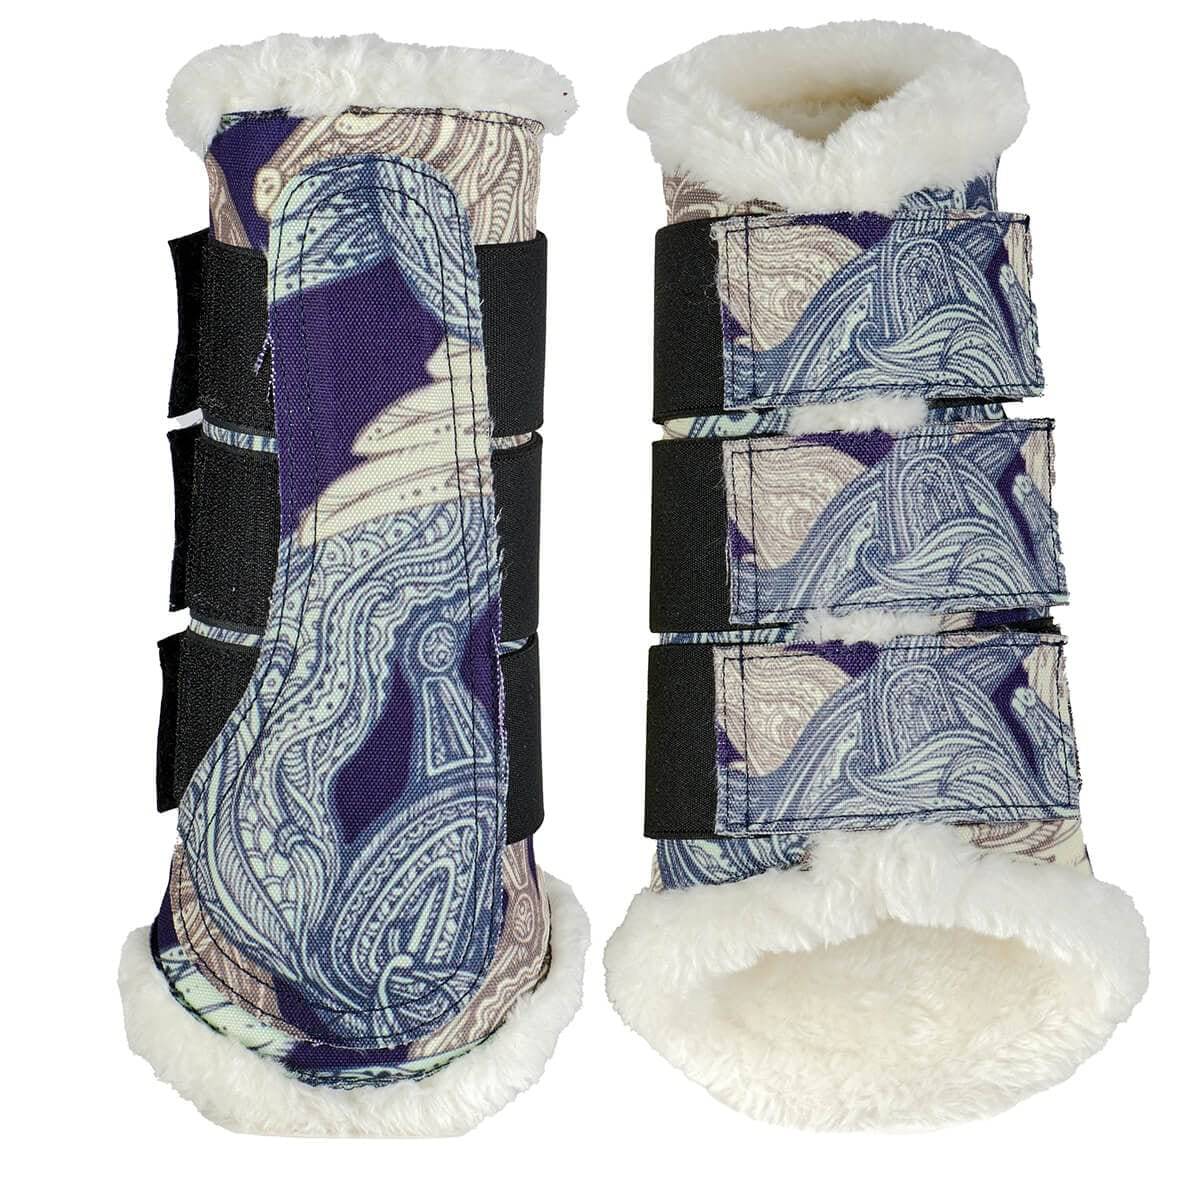 Ovation Altitude Print Gallop Boots